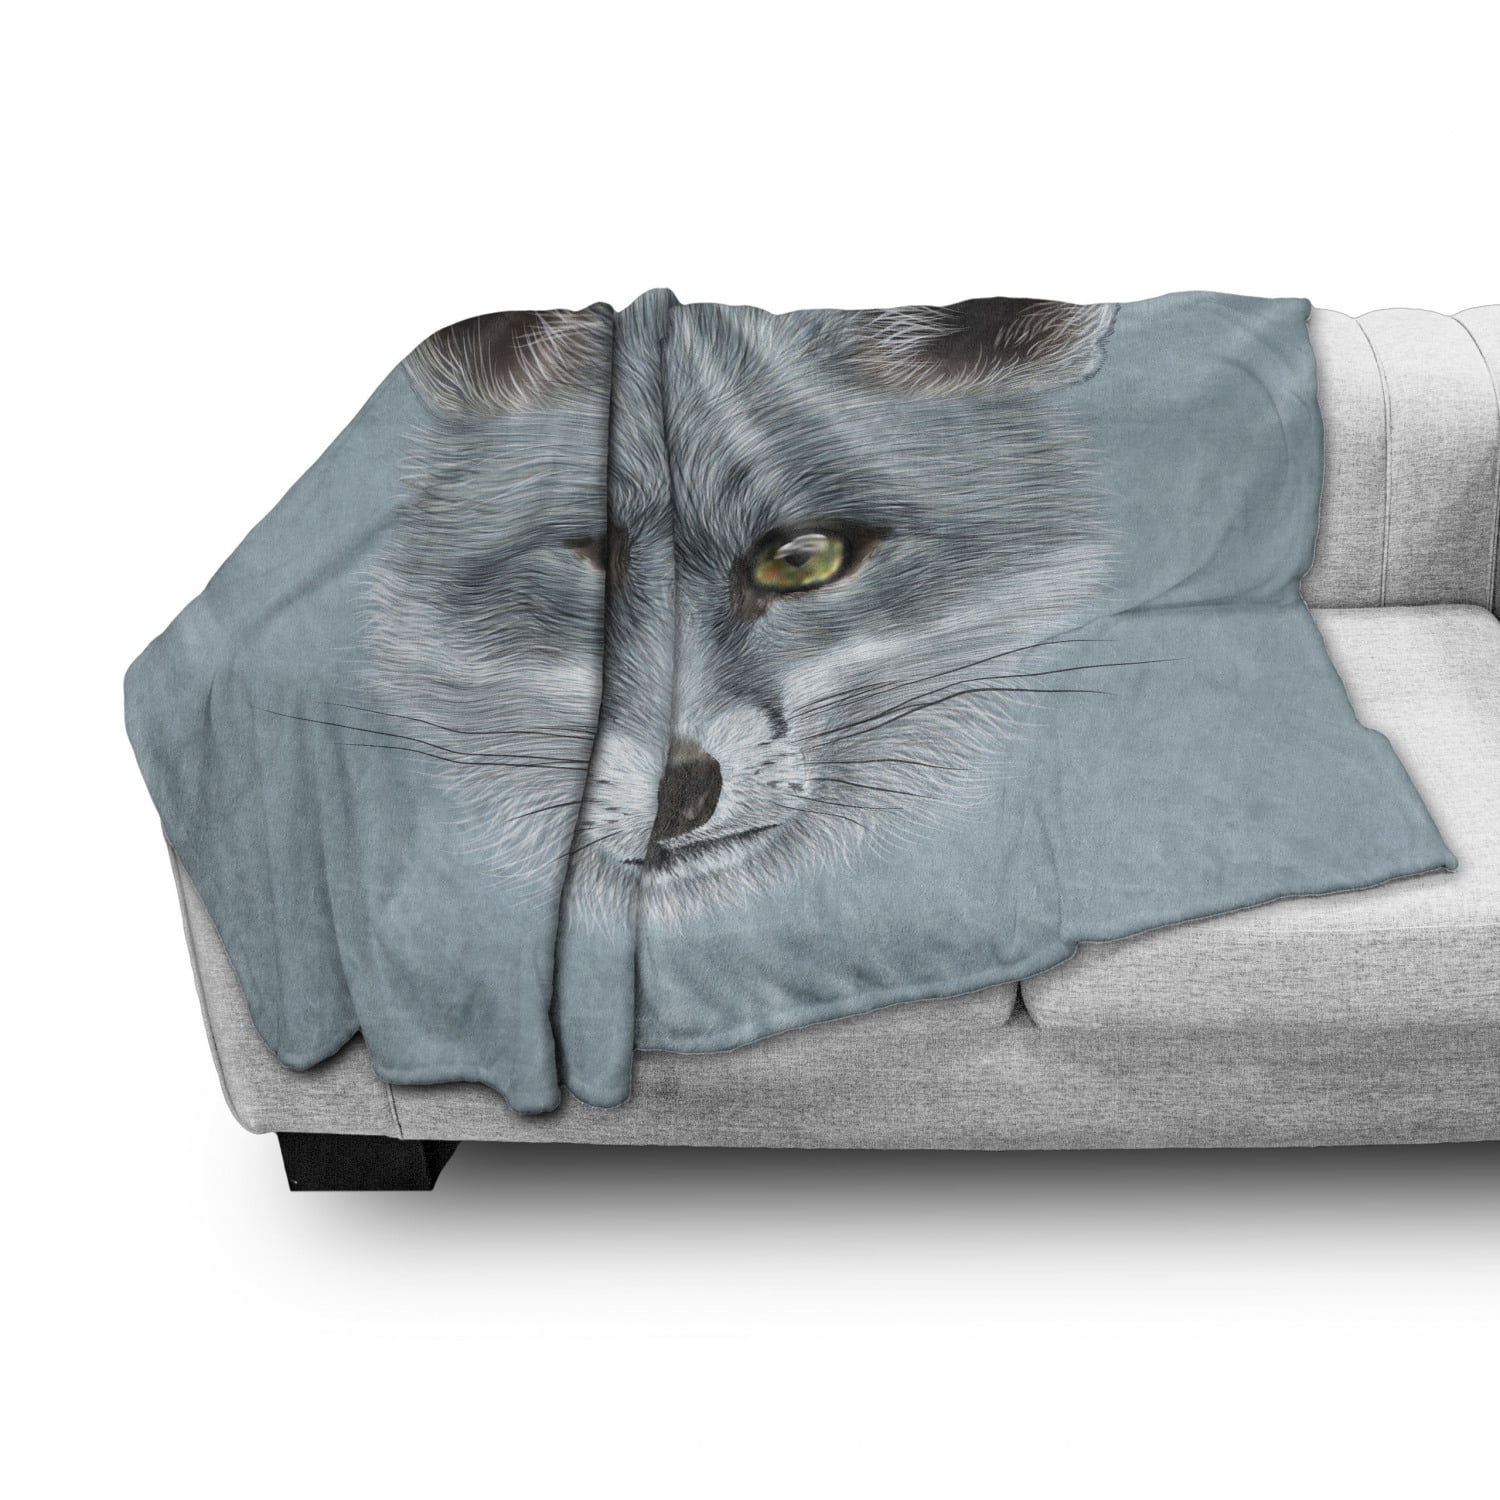 50 x 70 Pale Blue Ambesonne Animal Throw Blanket Flannel Fleece Accent Piece Soft Couch Cover for Adults Grey Fox Portrait Fluffy Forest Creature Mammal Wildlife Style Illustration 